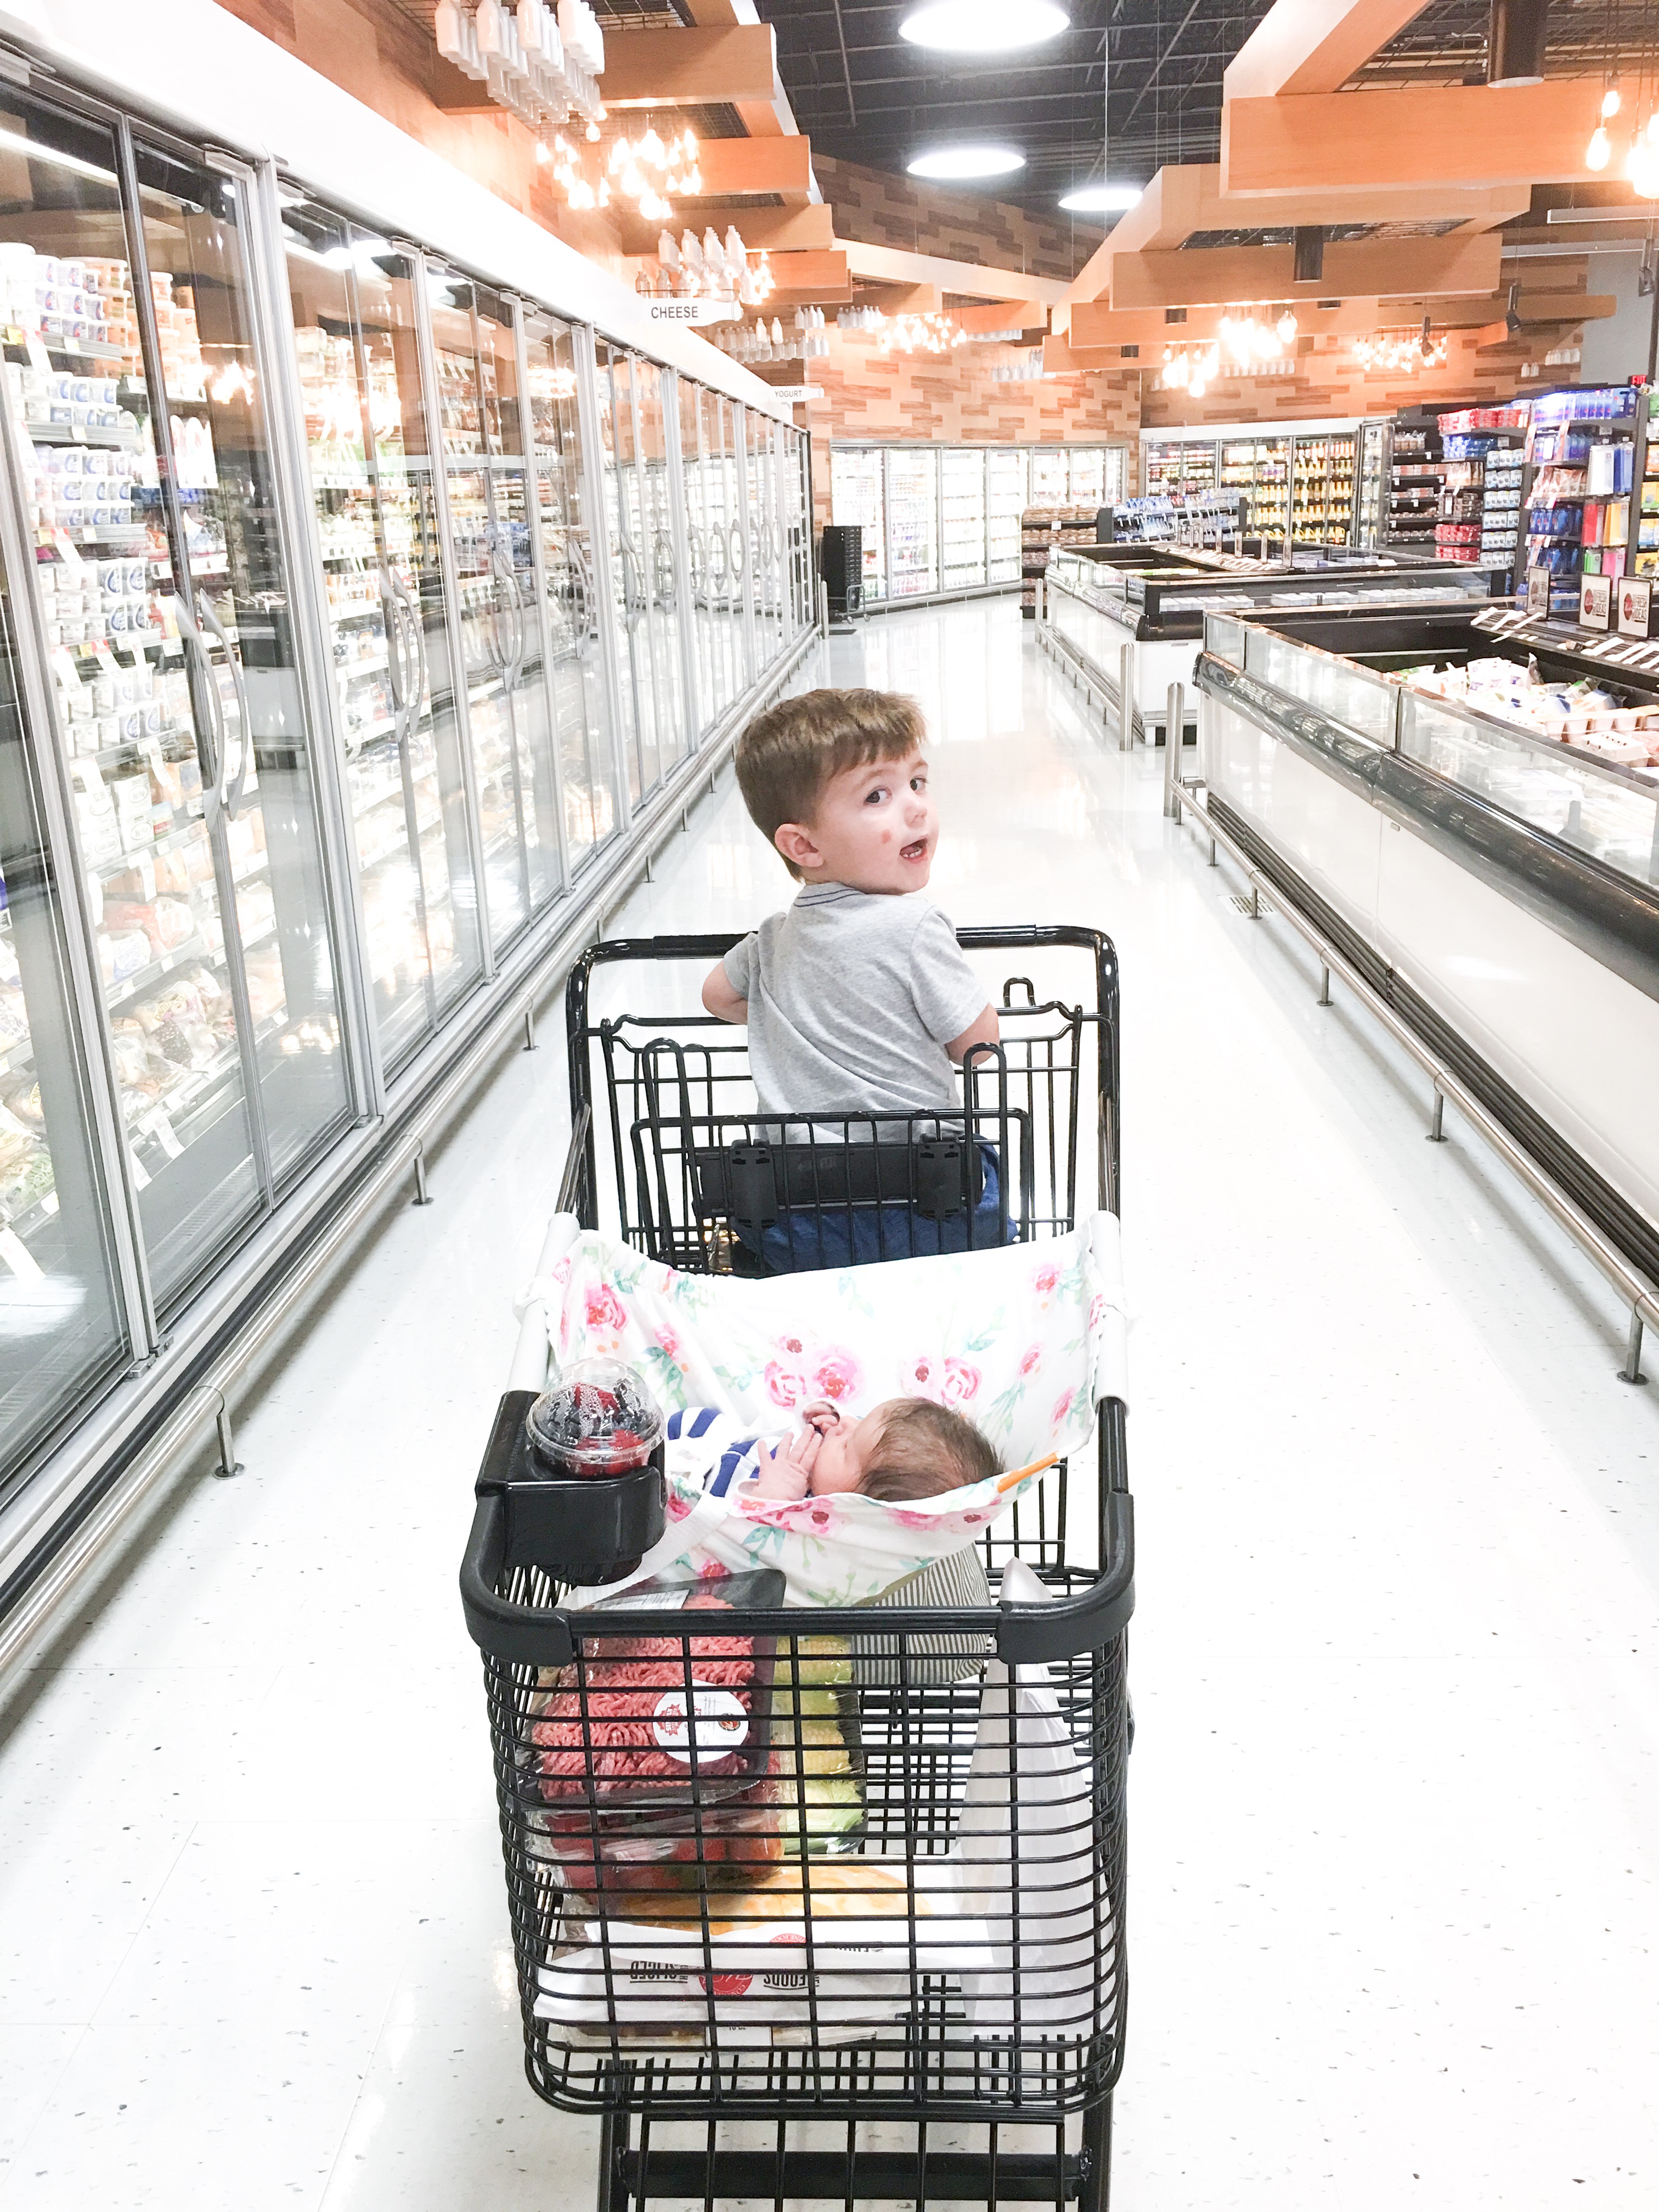 Grocery Shopping with a Newborn and Toddler